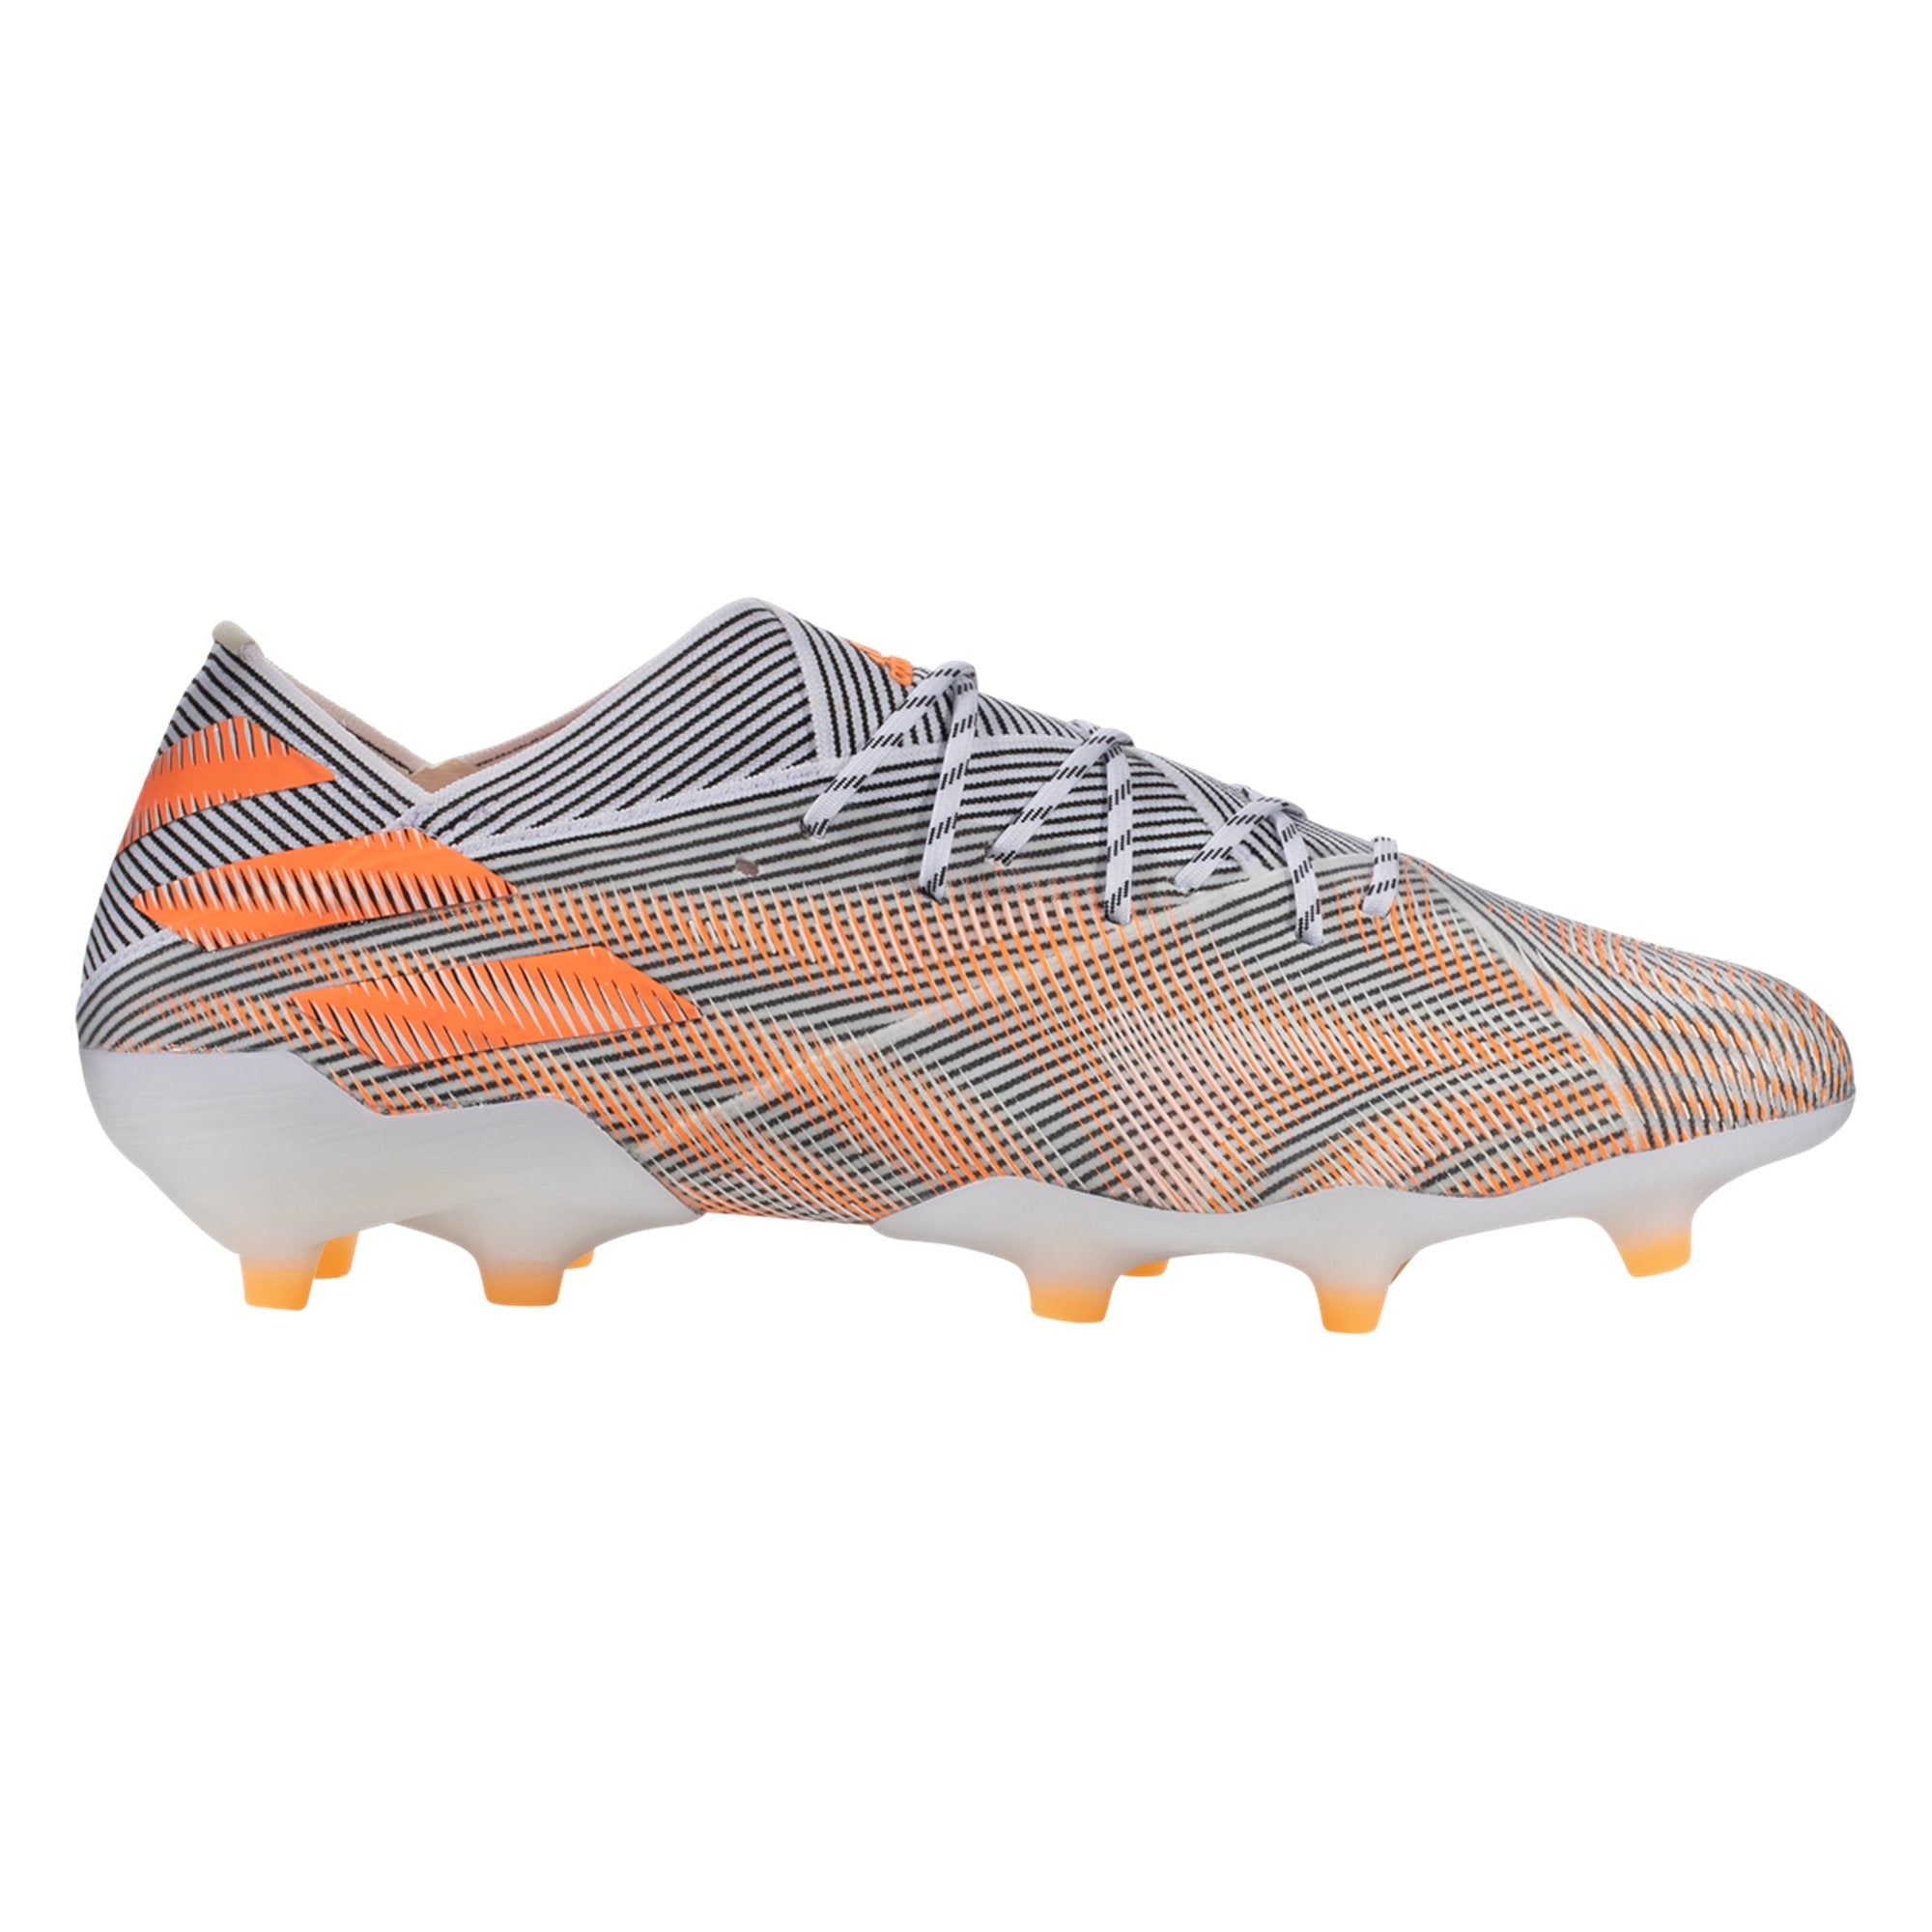 adidas .1 FG Firm Soccer Cleat - Cloud White/Screaming Orange/Core Black FW7327 – Soccer Zone USA